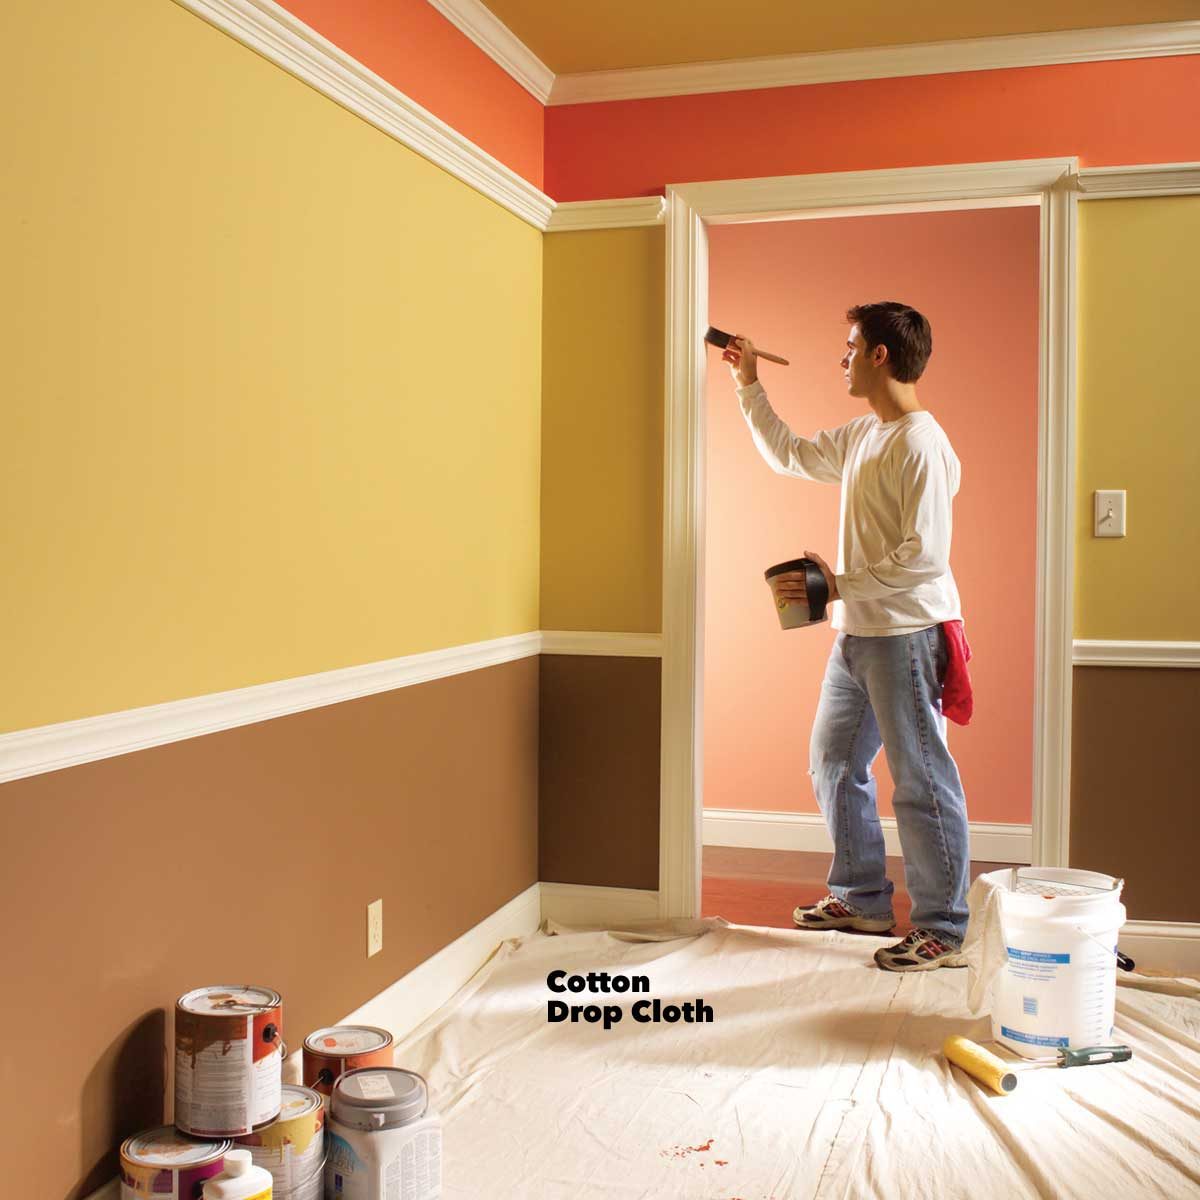 Painting Tips: How to Paint Faster  Painting tips, Room paint, Handyman